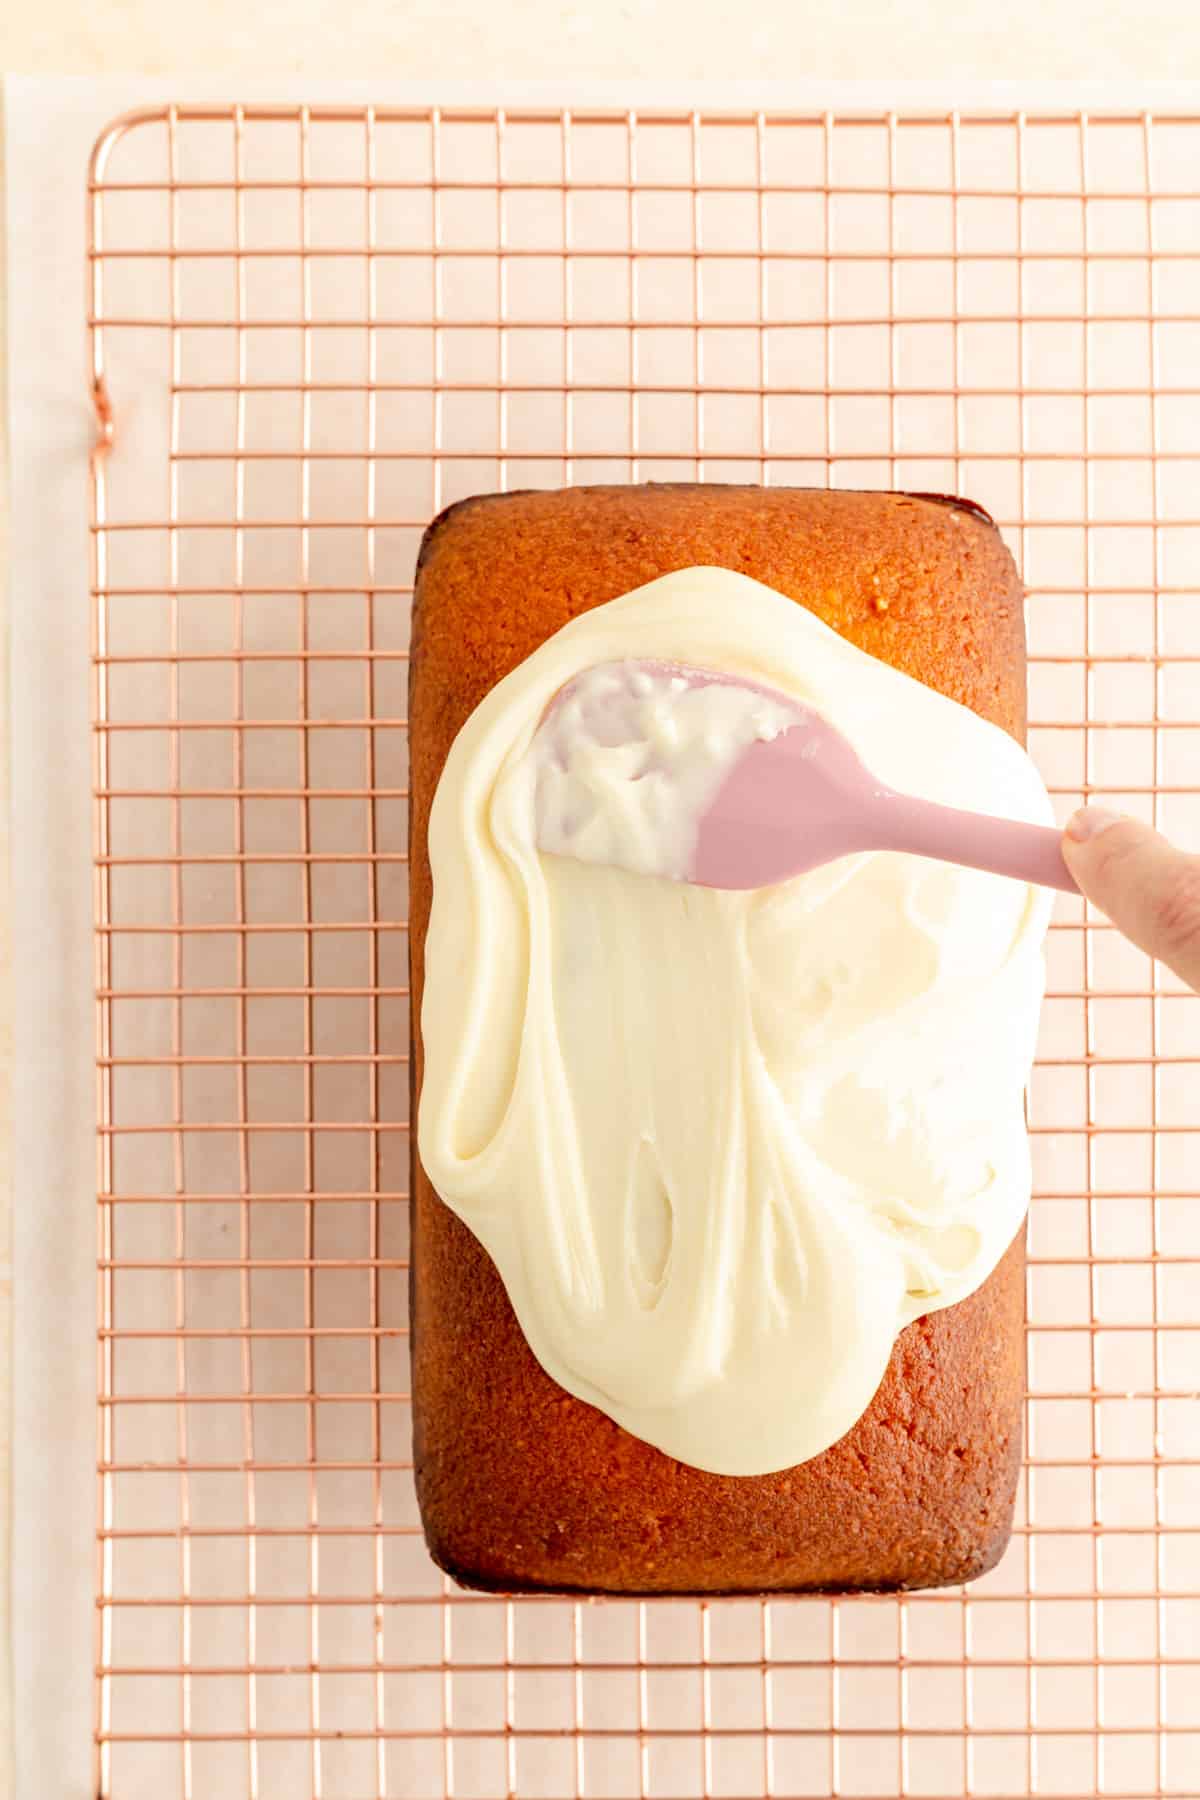 a hand with a pink spatula glazing a baked pound cake on a copper wire rack.